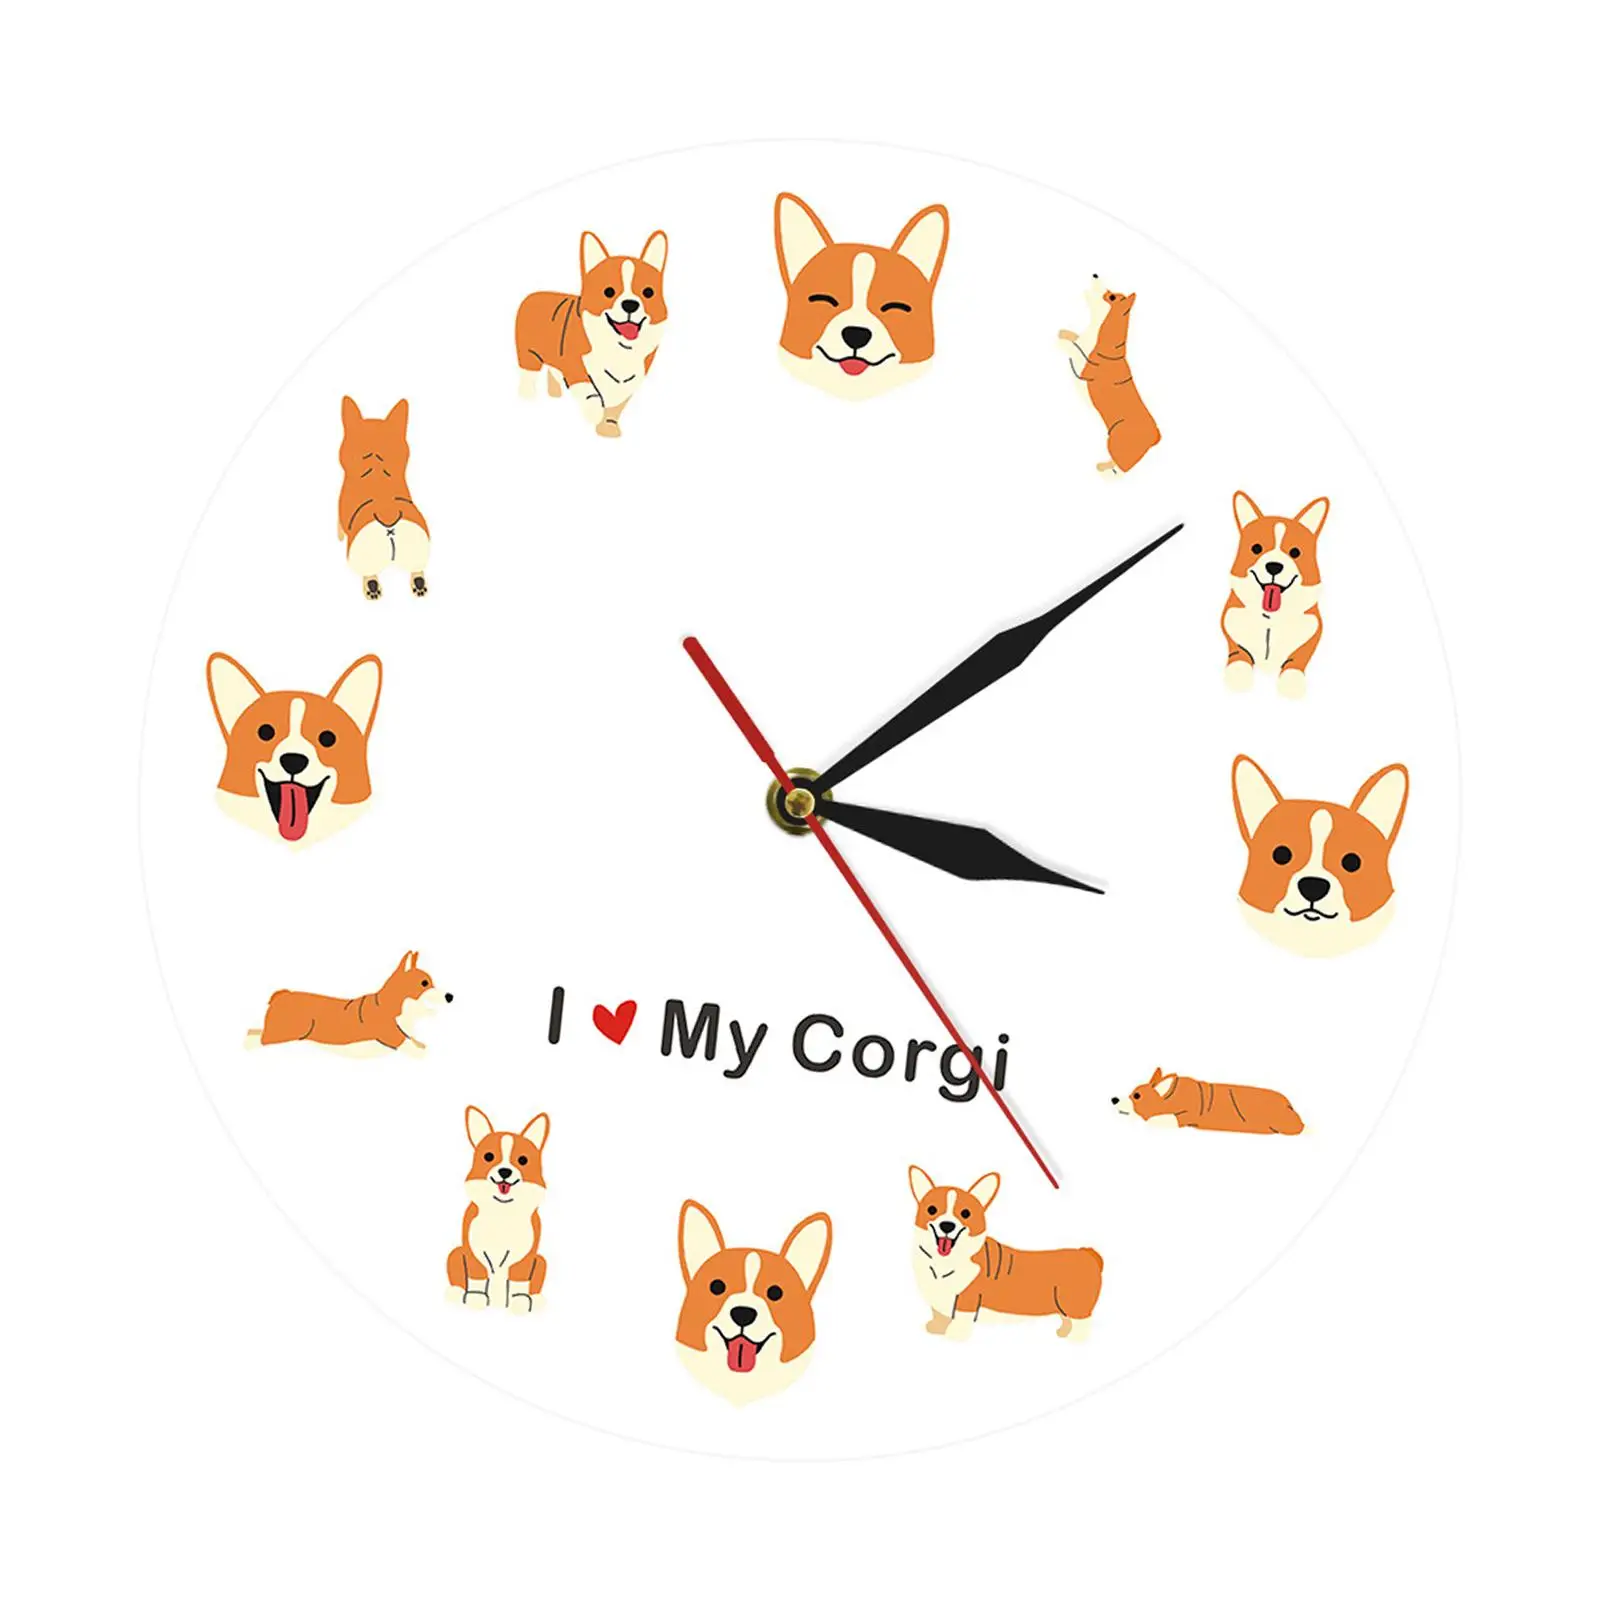 Hanging Wall Clock Art Decor Dogs Theme Decorative Silent Creative Fashion for Bedroom Living Room Dining Room Office Indoor